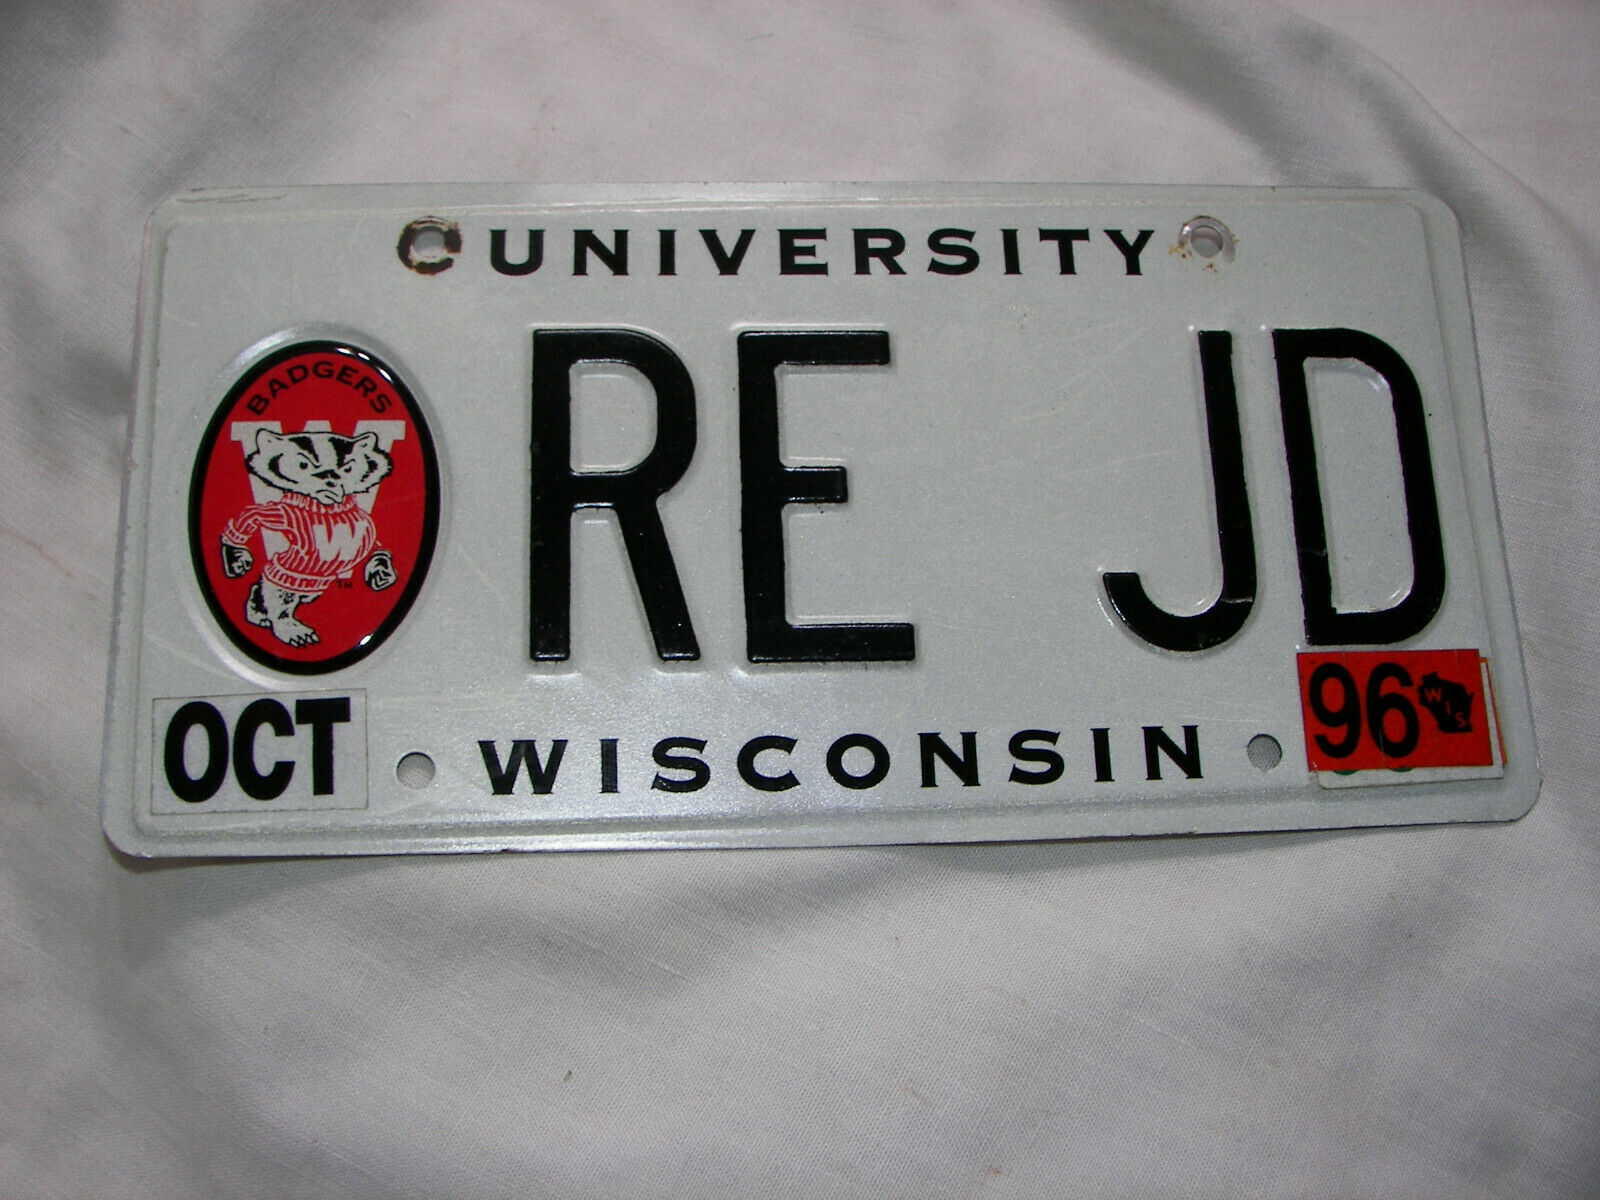 University Of Wisconsin Badgers Alumni License Plate From Wisconsin Very Clean !